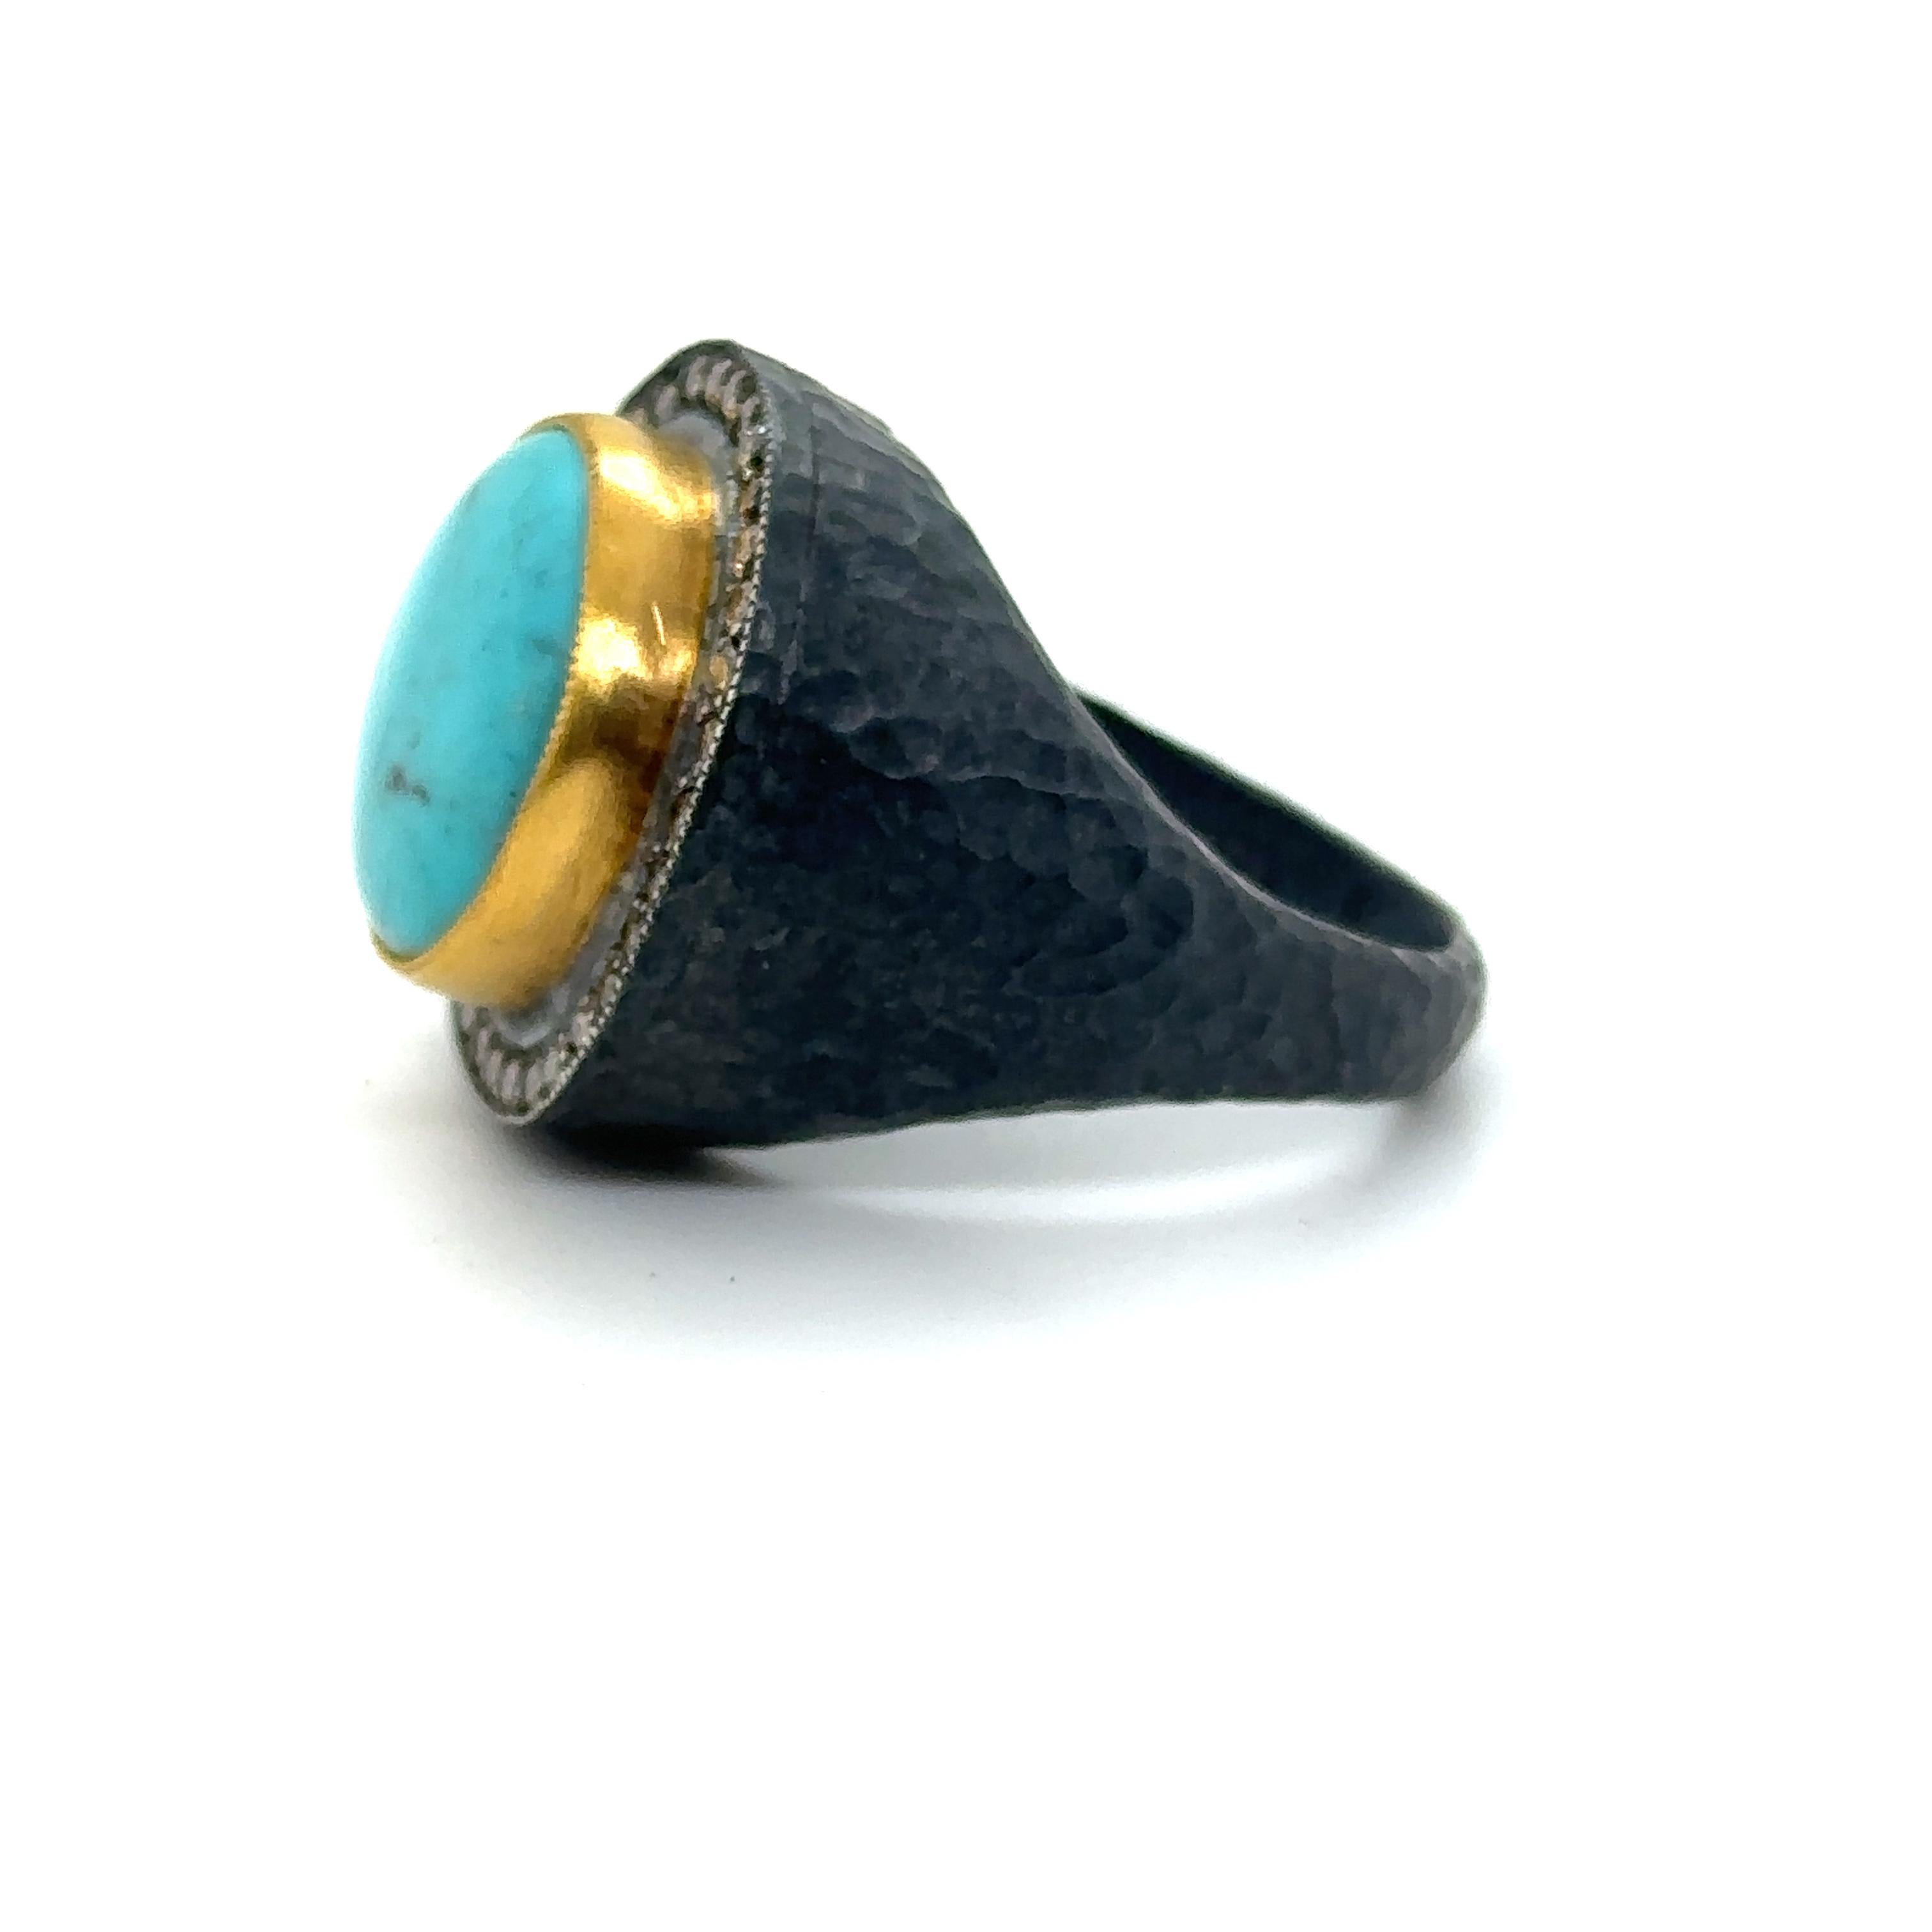 24KT GOLD/SS TURQUOISE RING with CHAMPAGNE DIAMONDS
Metal: 24K GOLD/OXIDIZED SS
Diamond Info: CHAMPAGNE DIAMONDS SI/12 
Stone Info: 15MM ROUND TURQUOISE
Total Diamond Weight: 0.50 cwt.
Total Stone Weight: 13.00 cwt.
Item Weight: 17.60 gm
Ring Size: 